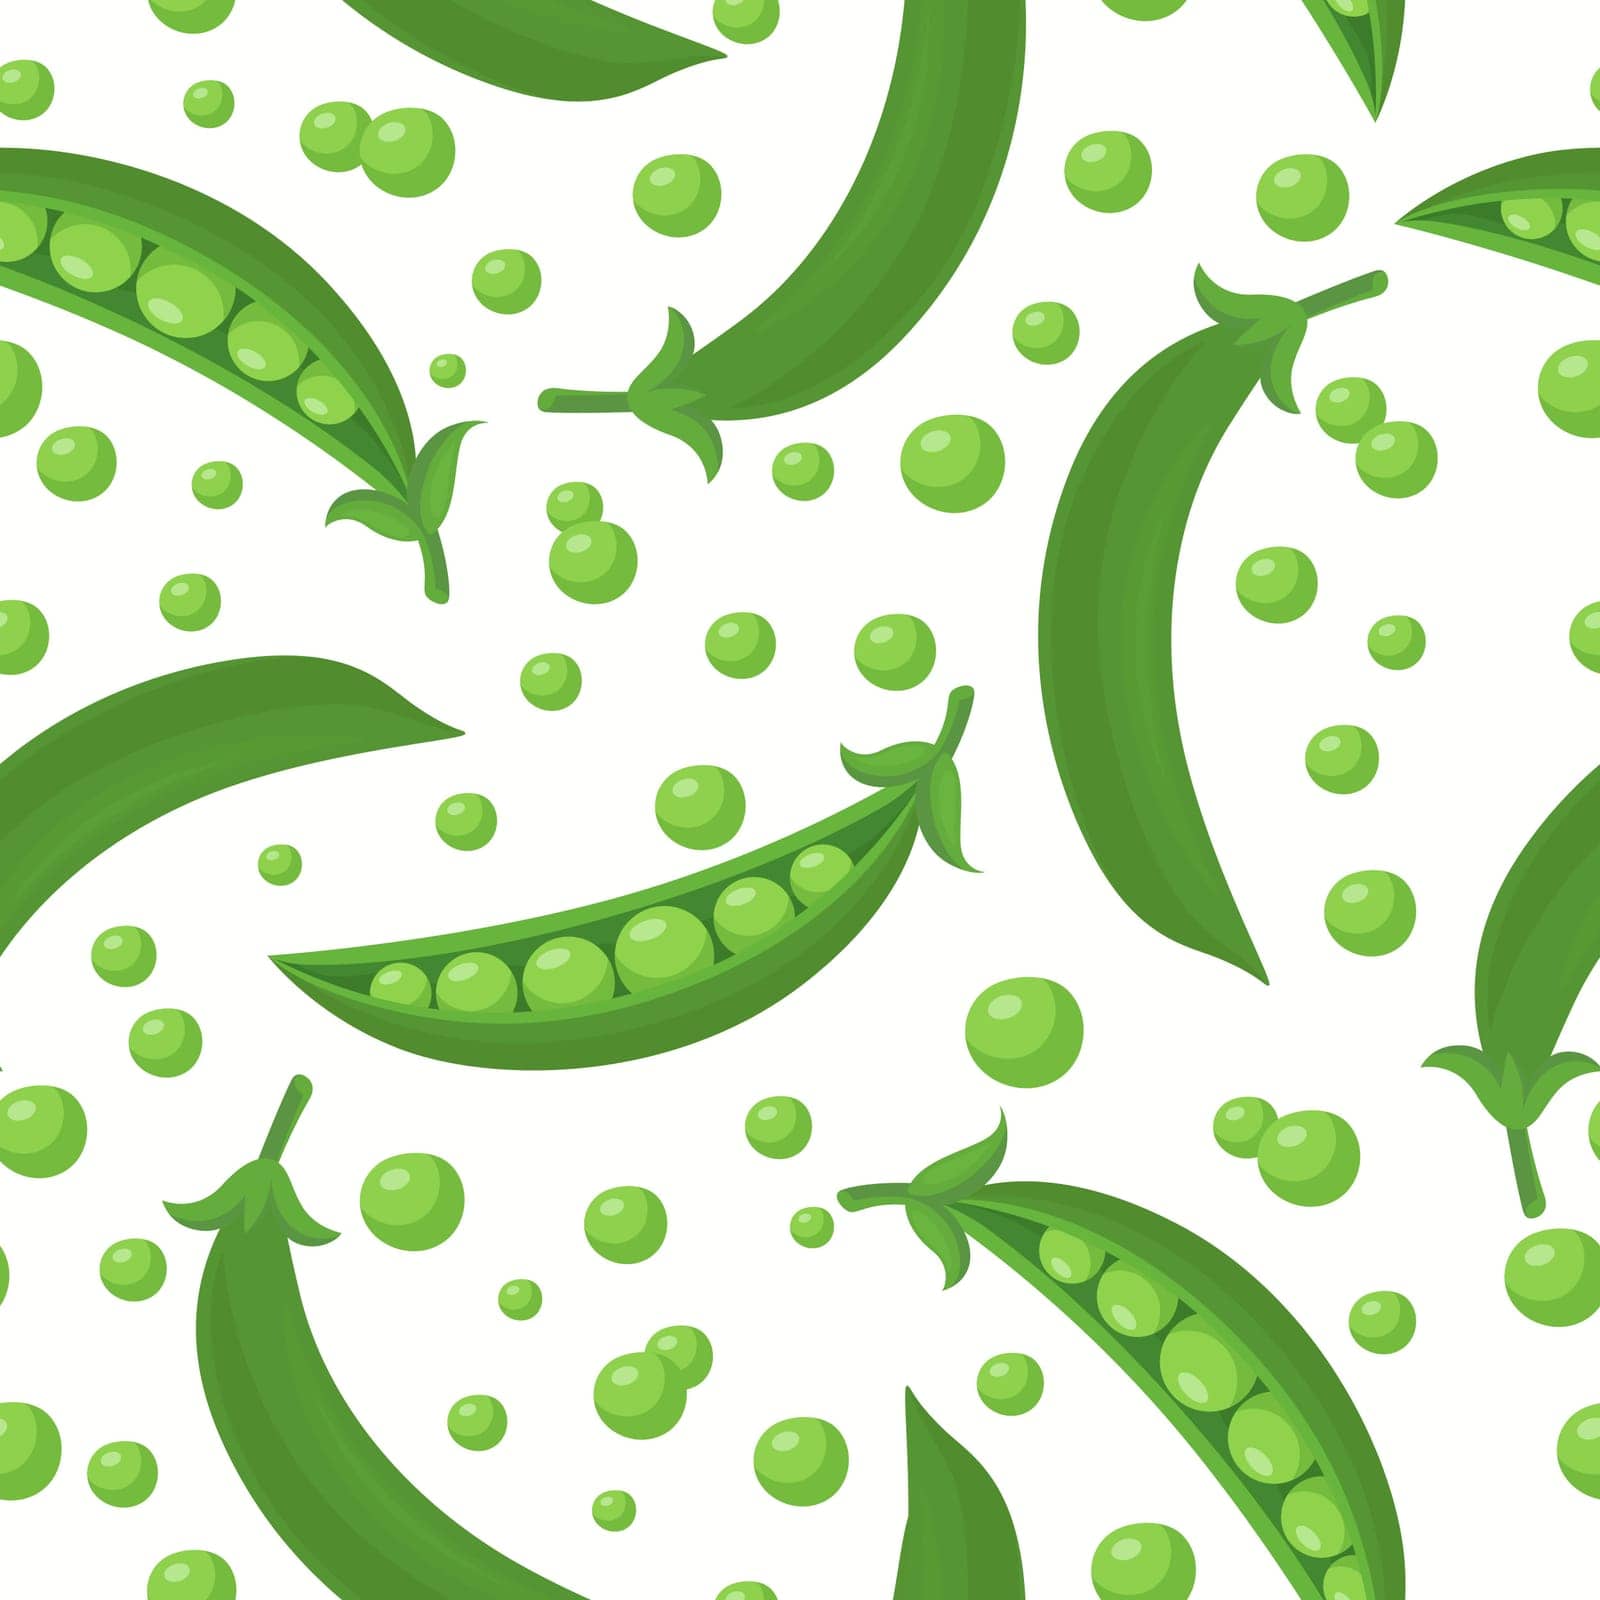 Vector Seamless Pattern with Flat Green Pea Pod. Cartoon Green Peas Design Template for Textile, Wallpaper, Culinary Packaging.